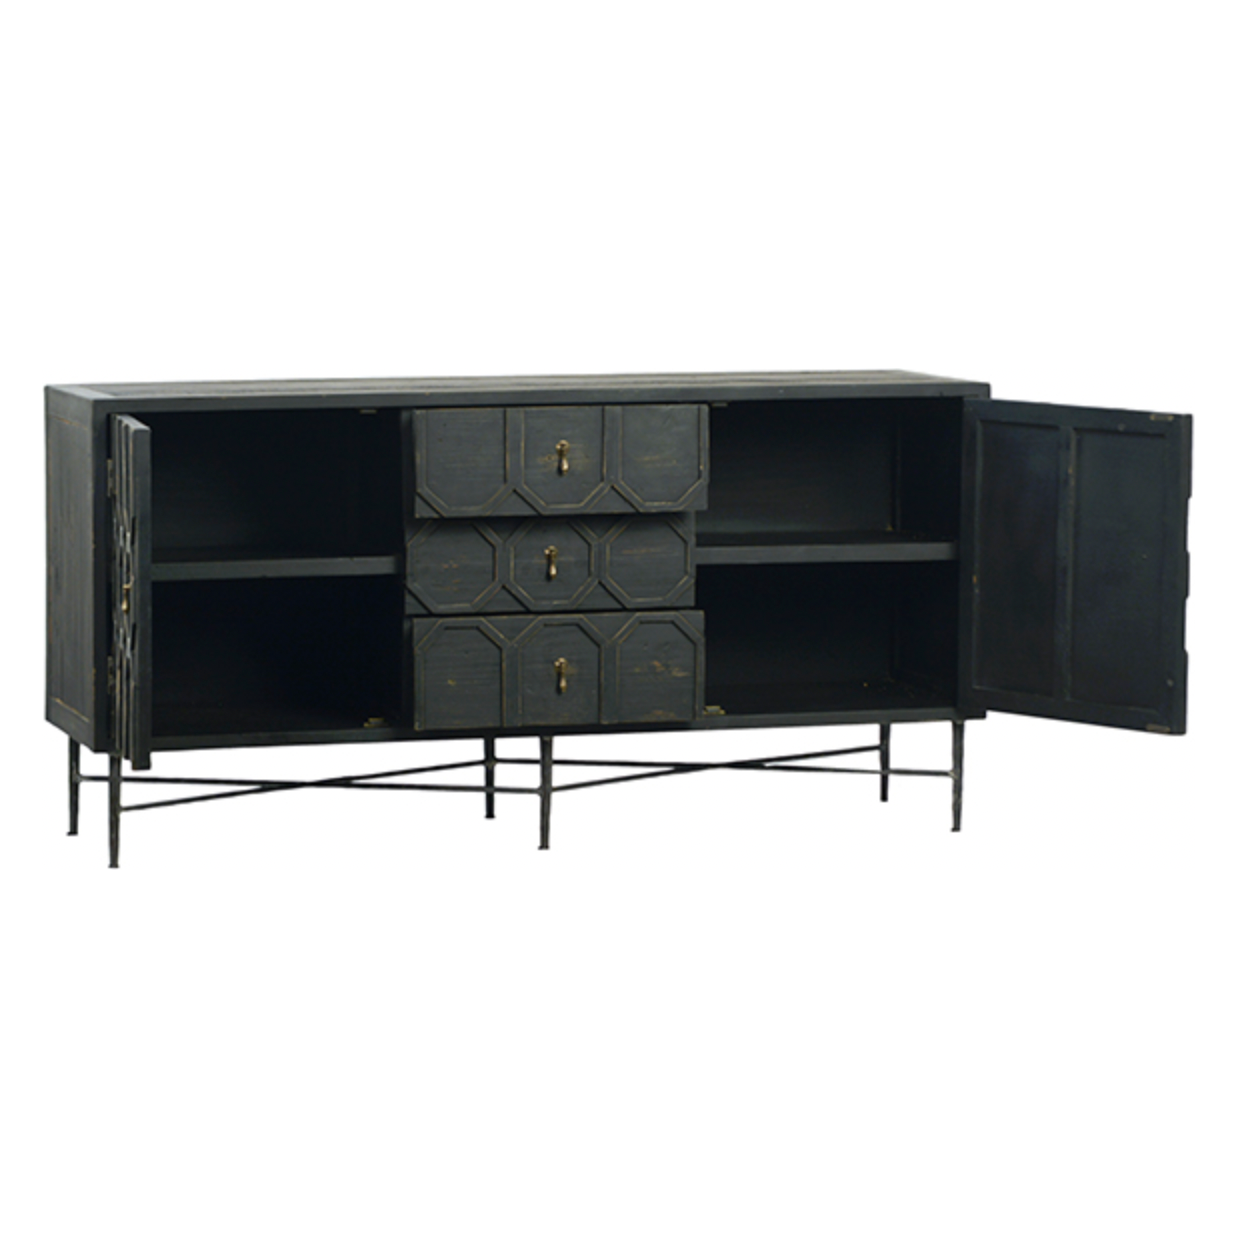 The Harten cabinet is beautifully crafted of black stained pine.  Its versatile cabinet drawer combo is perfect for both media and dining room storage.  Size: 63"l x 20"d x 31"h  Finish may vary slightly by piece as this is a hand-crafted product.  Please allow 3-5 weeks for shipping.